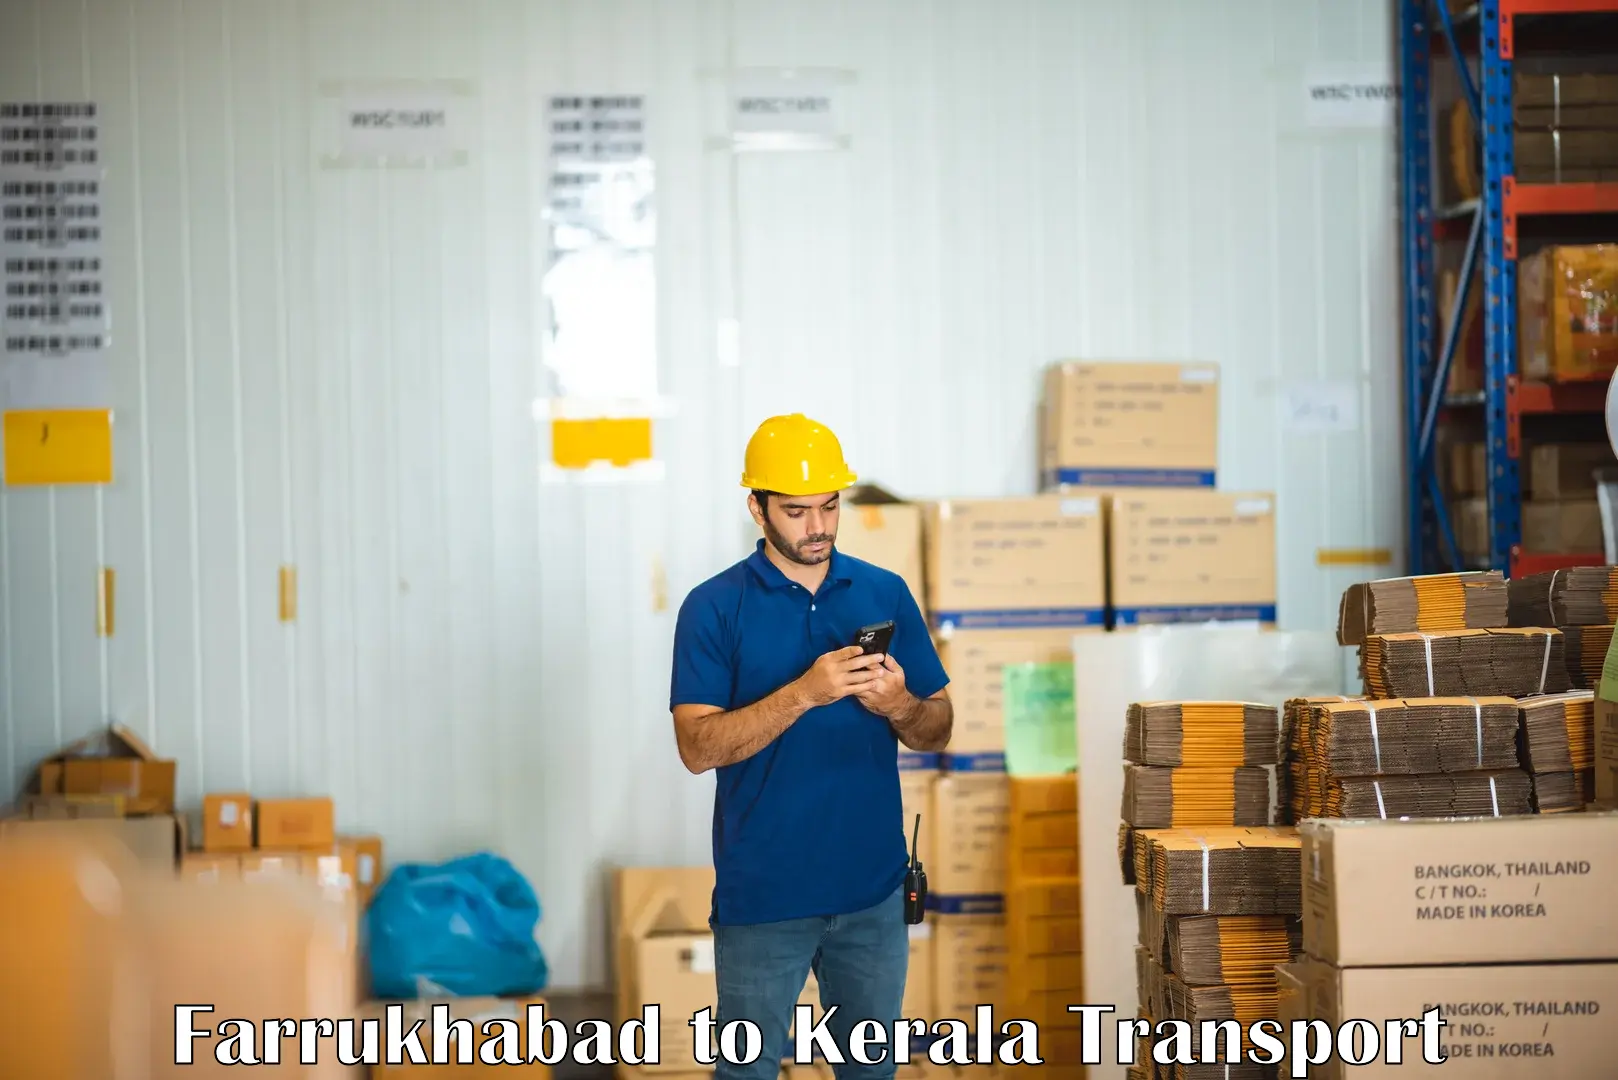 Transport in sharing in Farrukhabad to Kerala